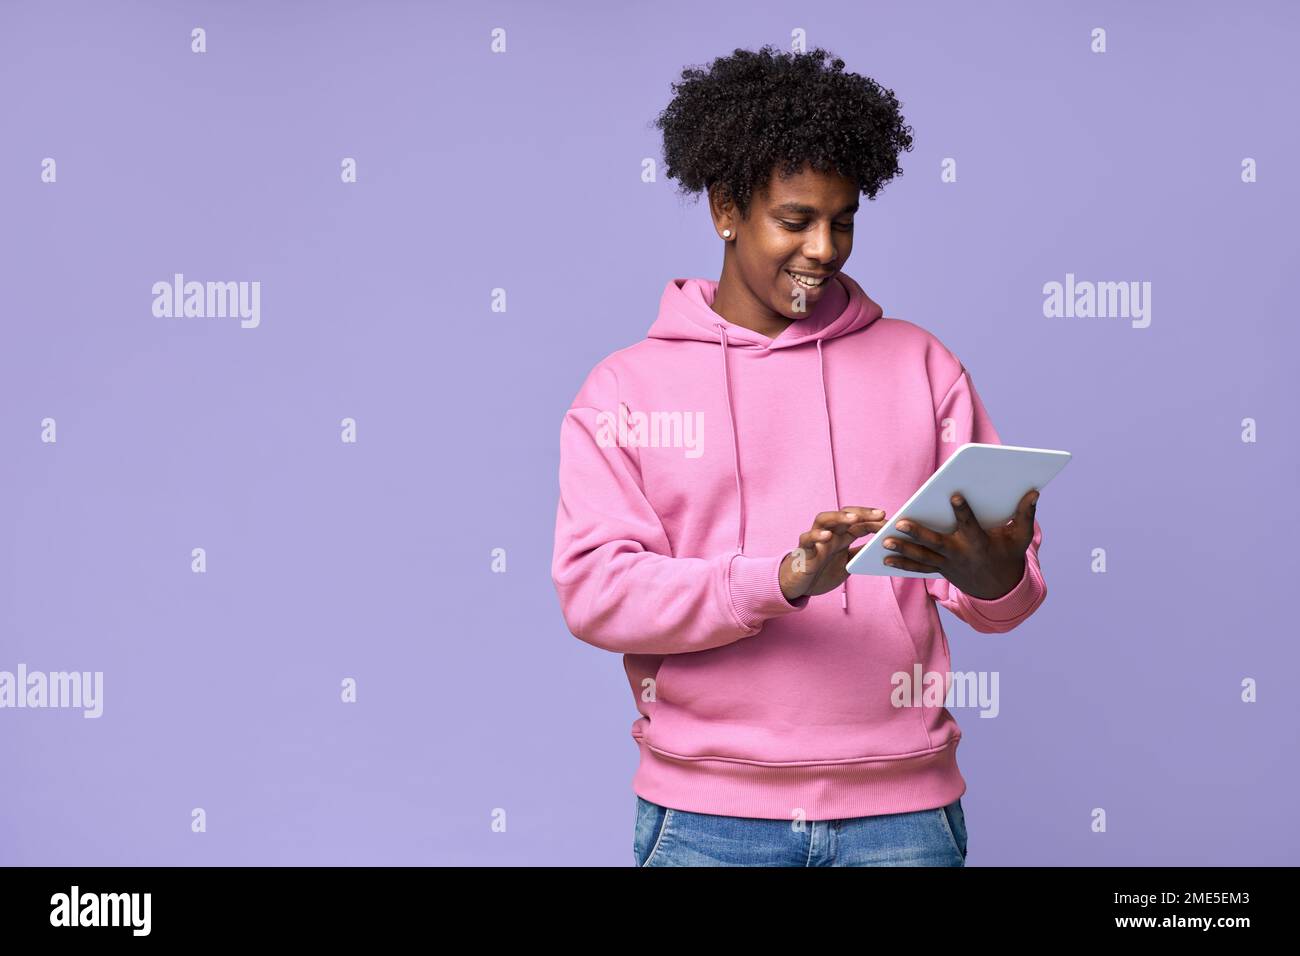 Happy African teenager holding using tablet isolated on purple background. Stock Photo